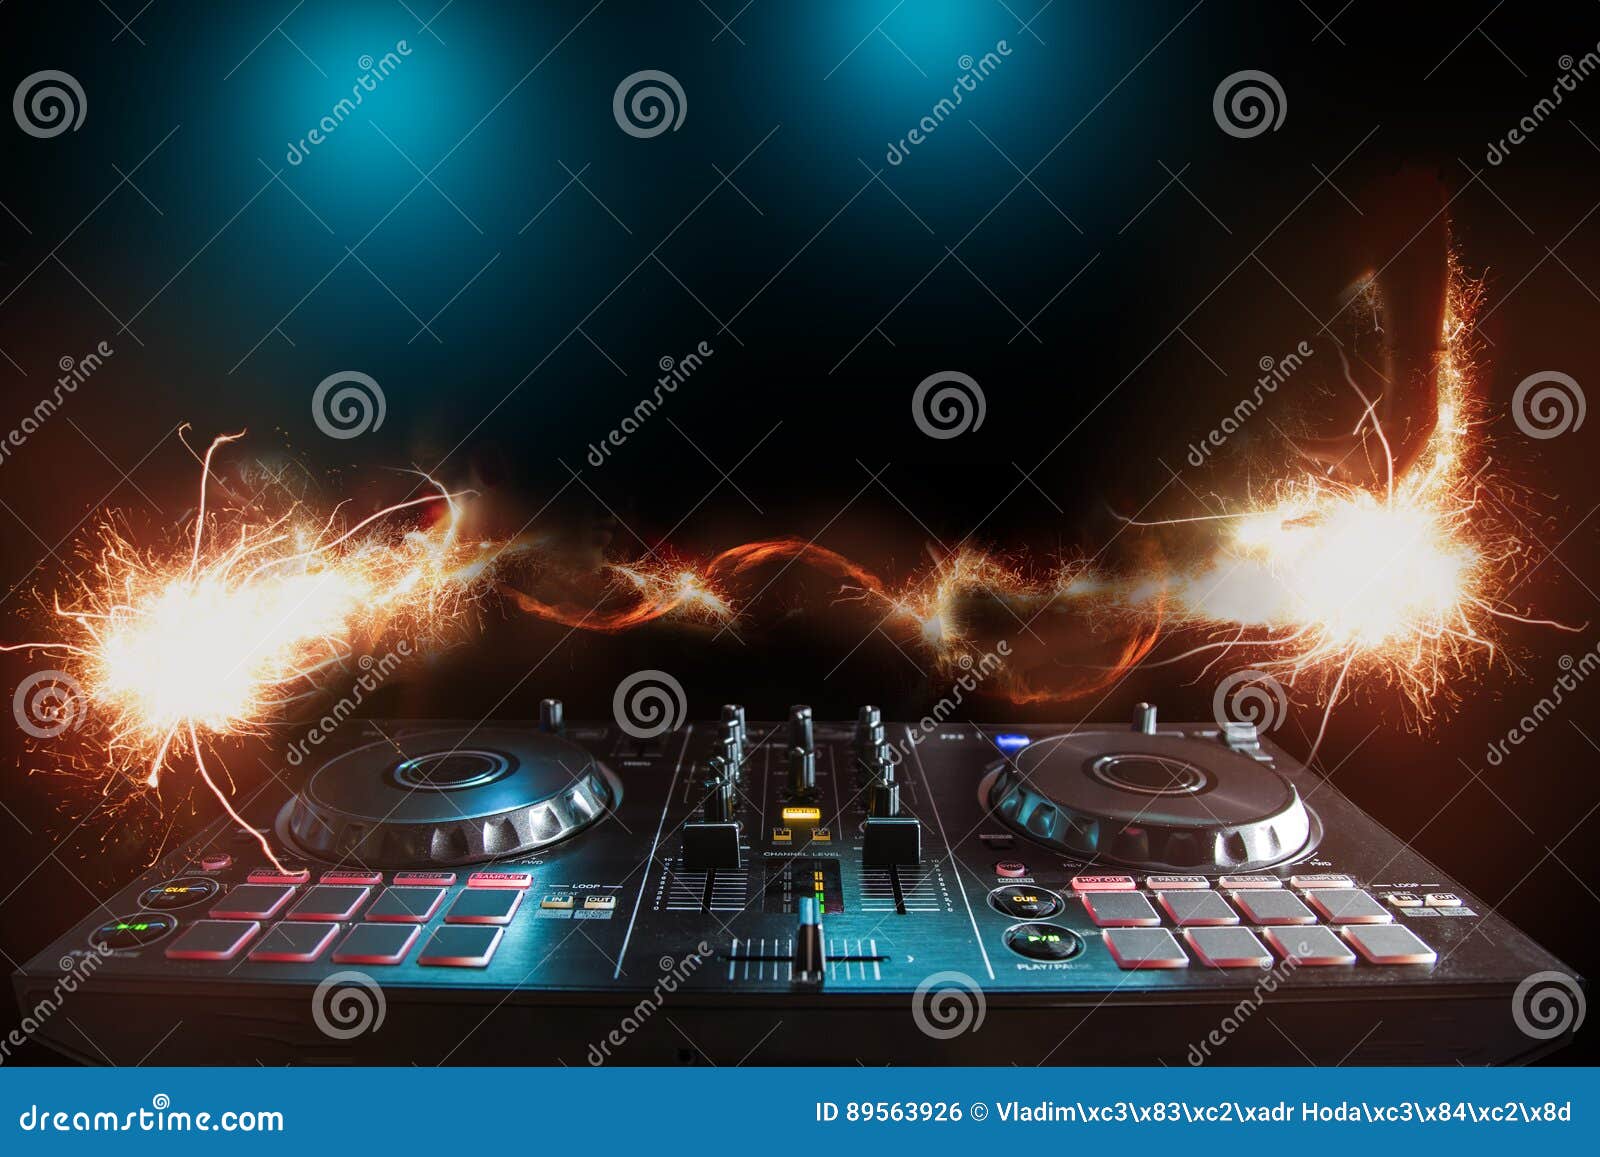 dj sound equipment at nightclubs and music festivals, edm, future house music and so on. parties concept, sound technique.